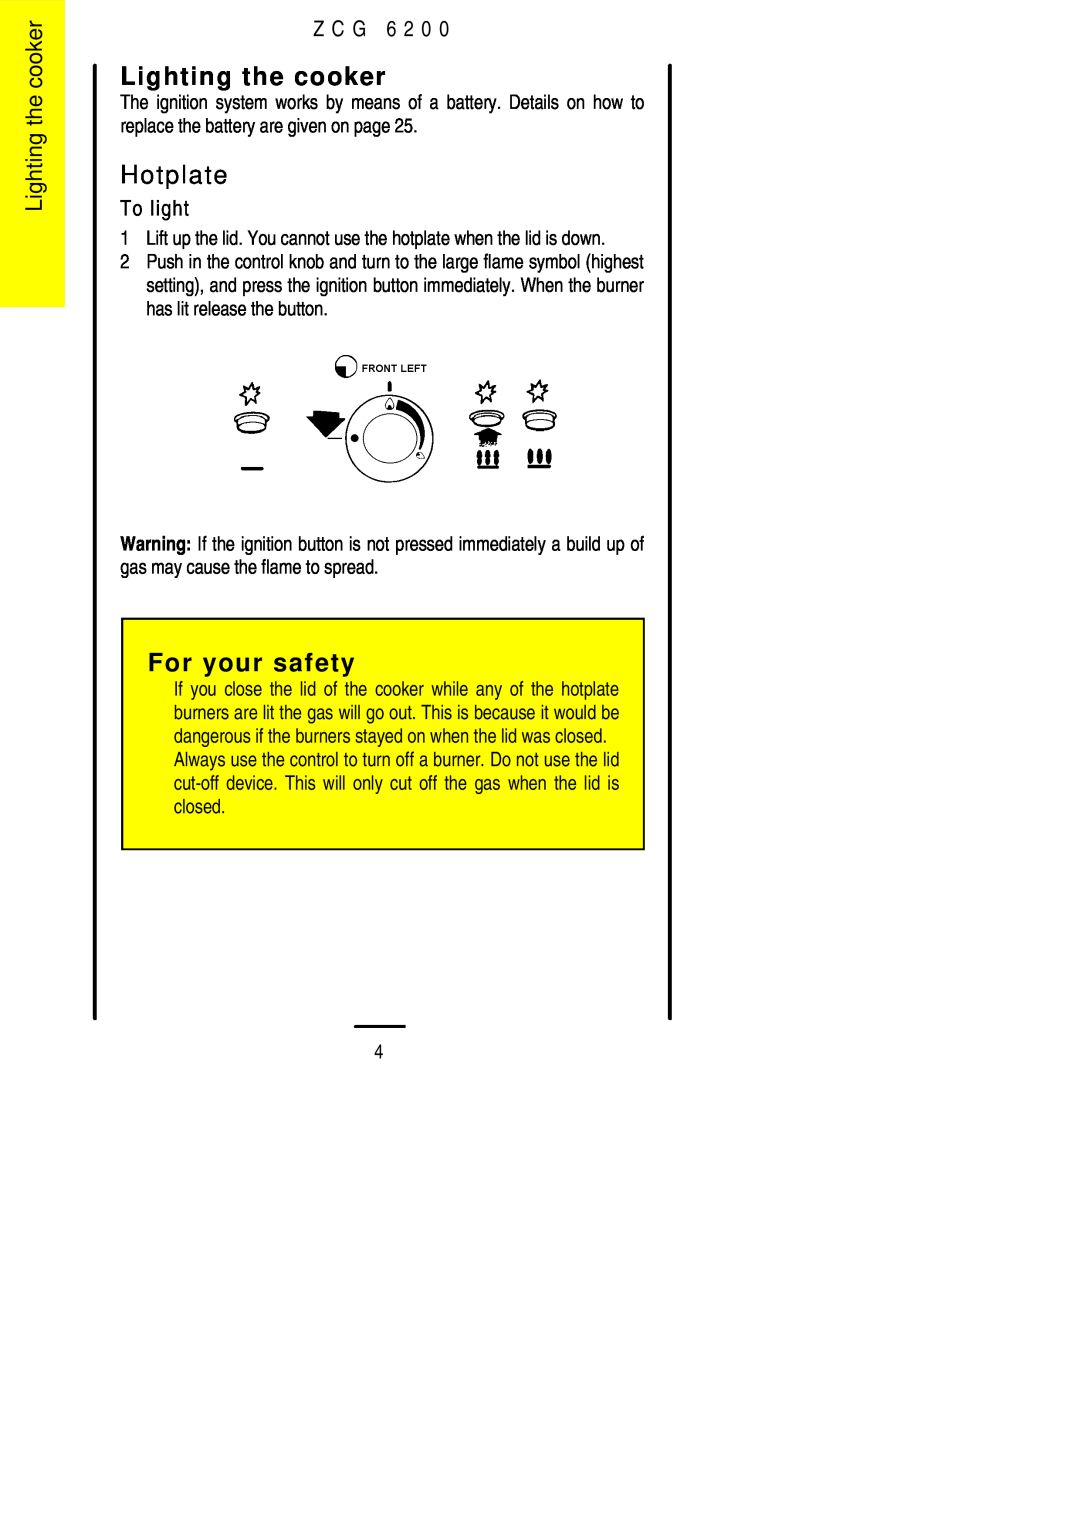 Zanussi ZCG 6200 installation instructions Lighting the cooker, Hotplate, To light, For your safety, Z C G 